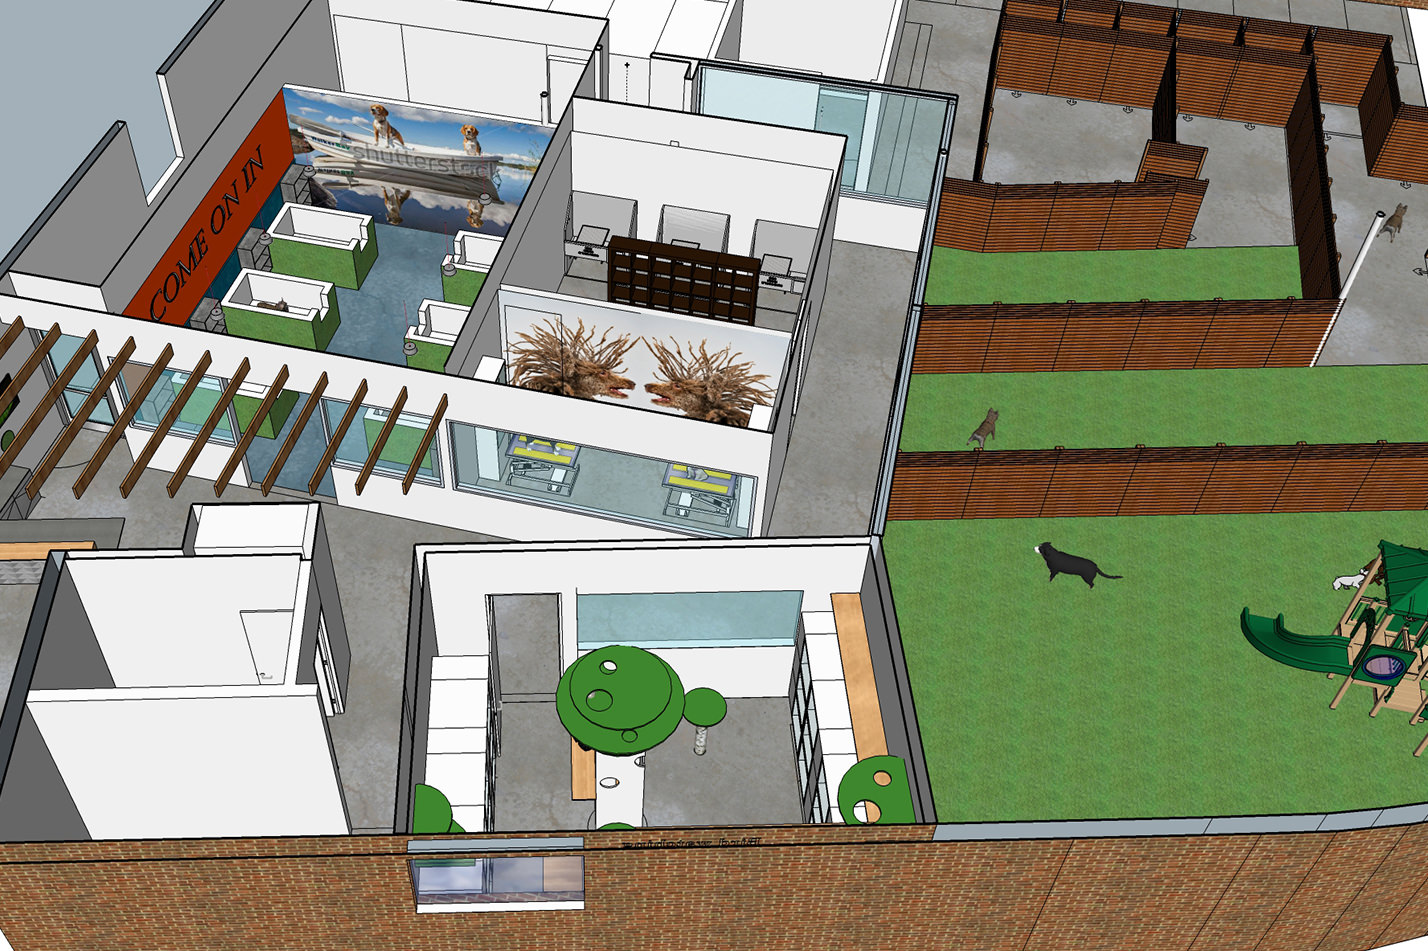 Space planning and graphics in SketchUp model designed by creative interior design firm